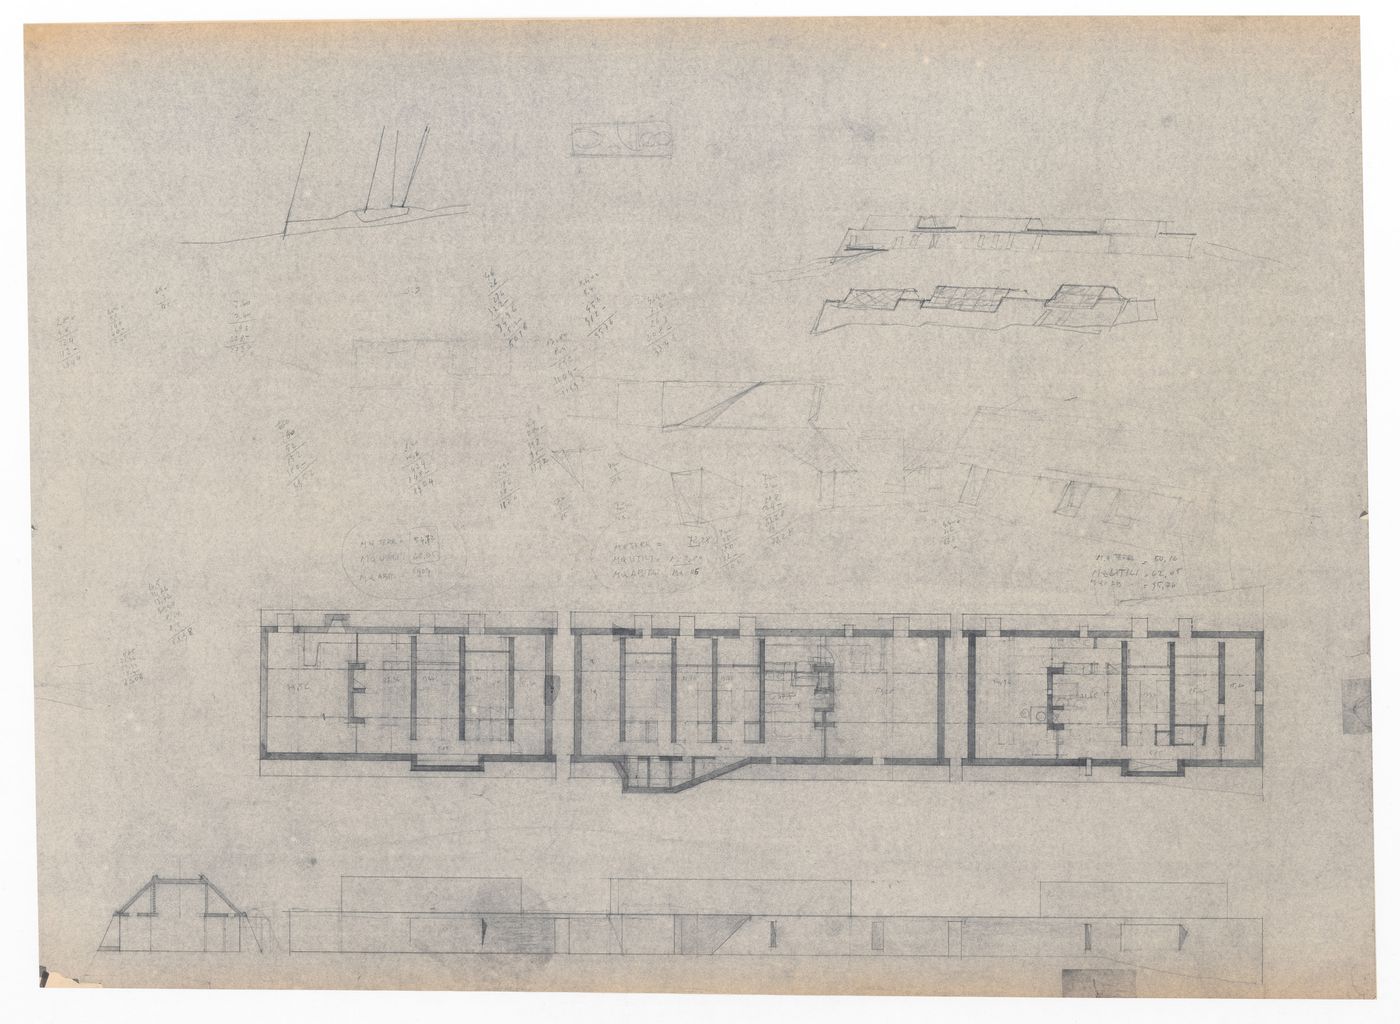 Floor plan, section, elevation, and sketches for Case Di Palma, Stintino, Italy